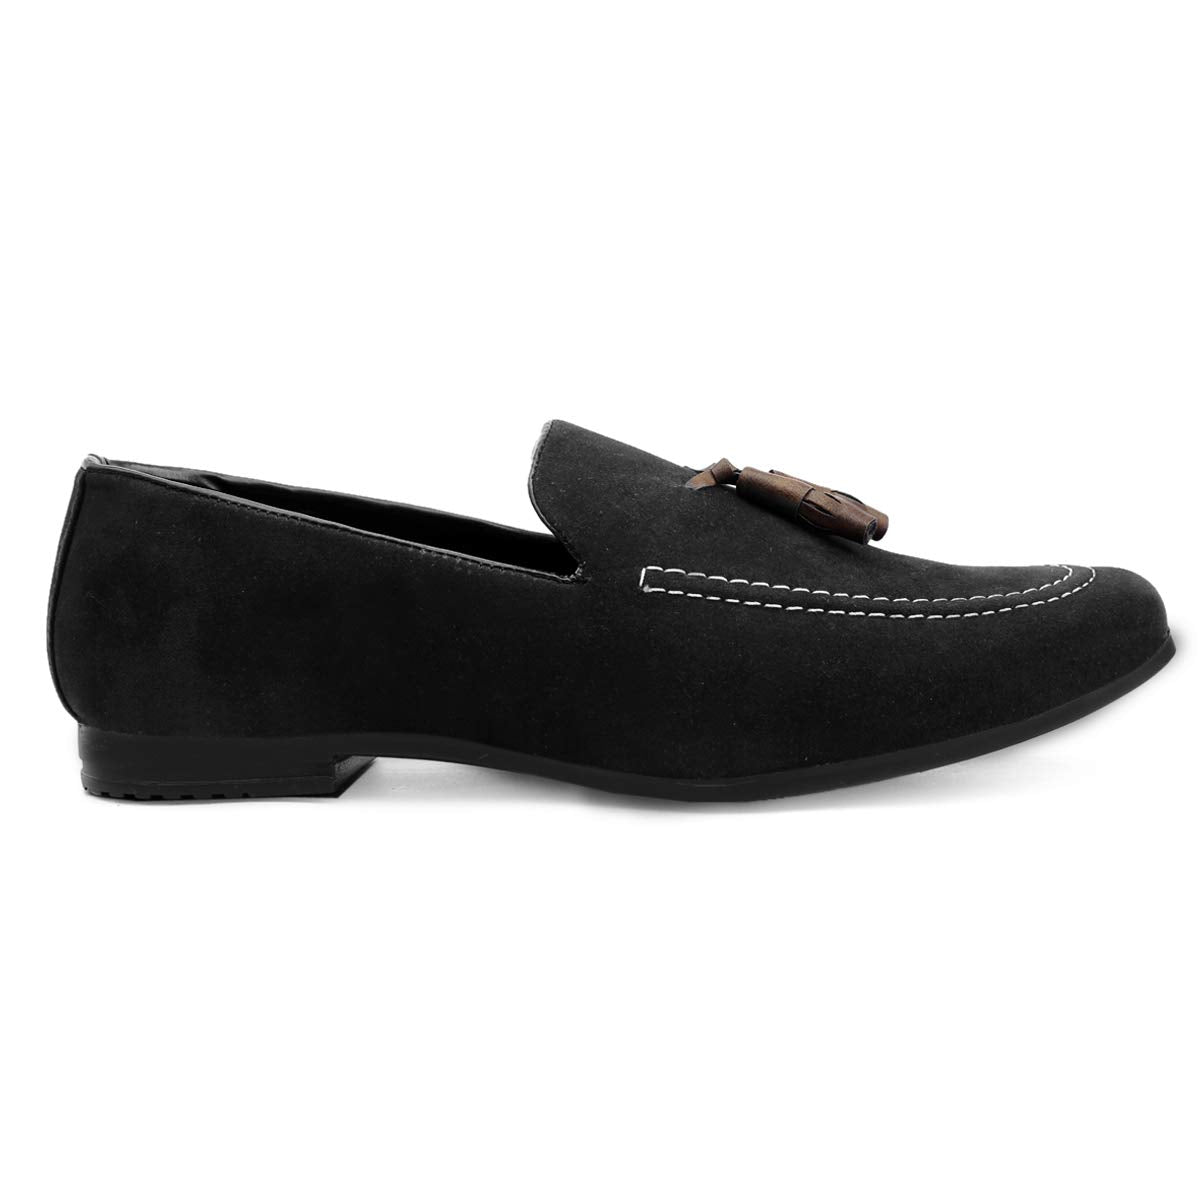 Classic Suede Material Loafer & Moccasin Casual Shoes For Men's-Unique and Classy